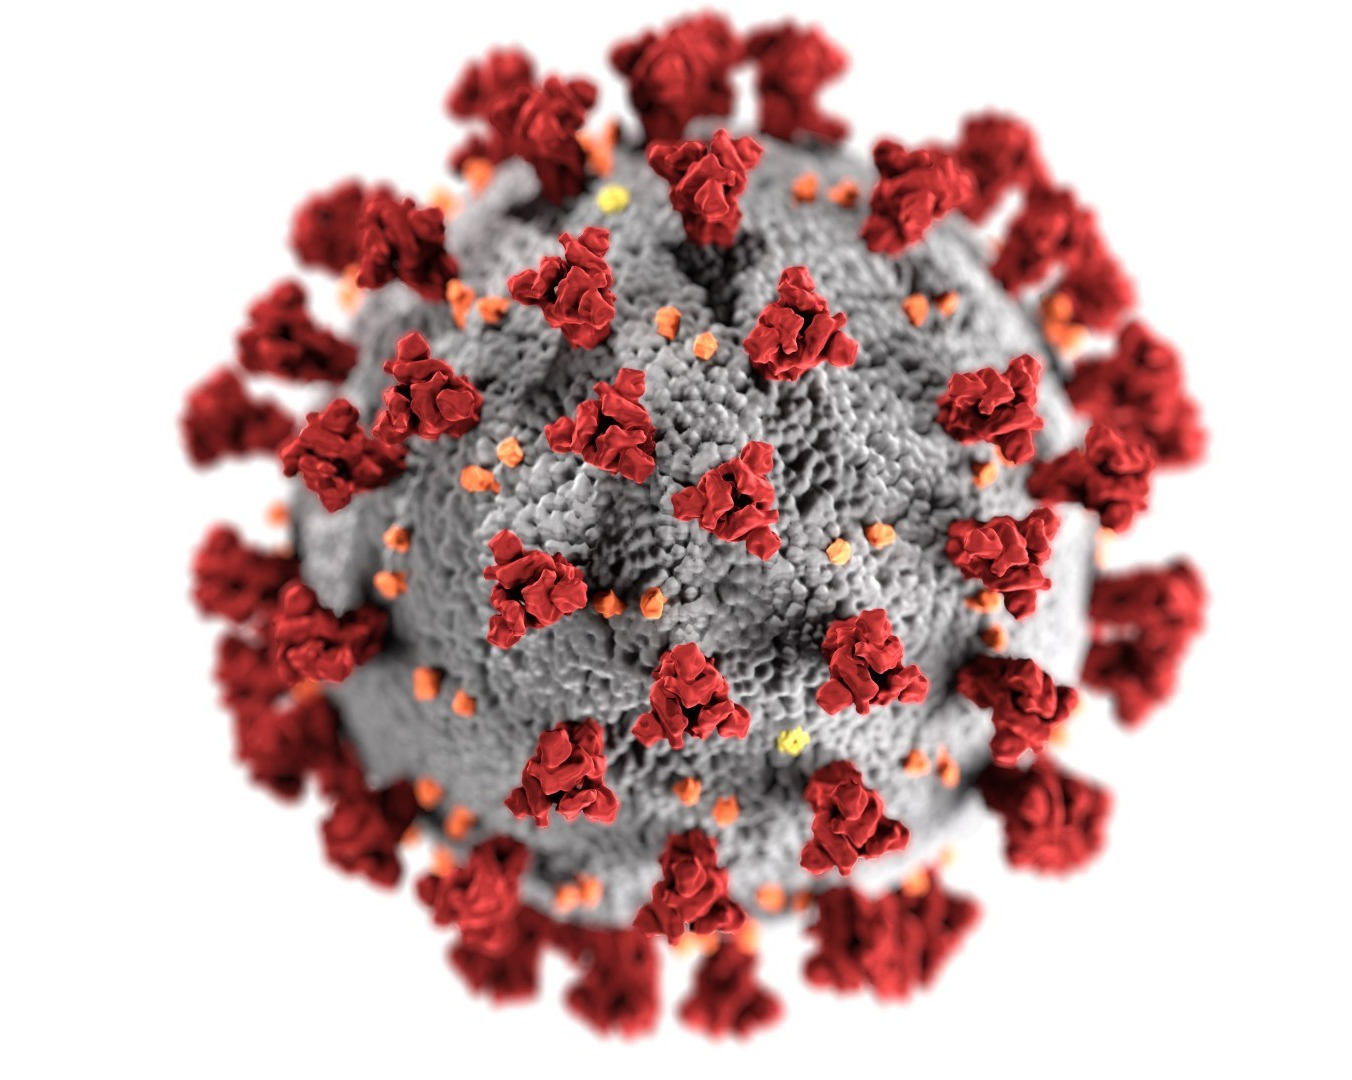 COVID-19 is not influenza, but it offers lessons on beating it, say Concordia researchers